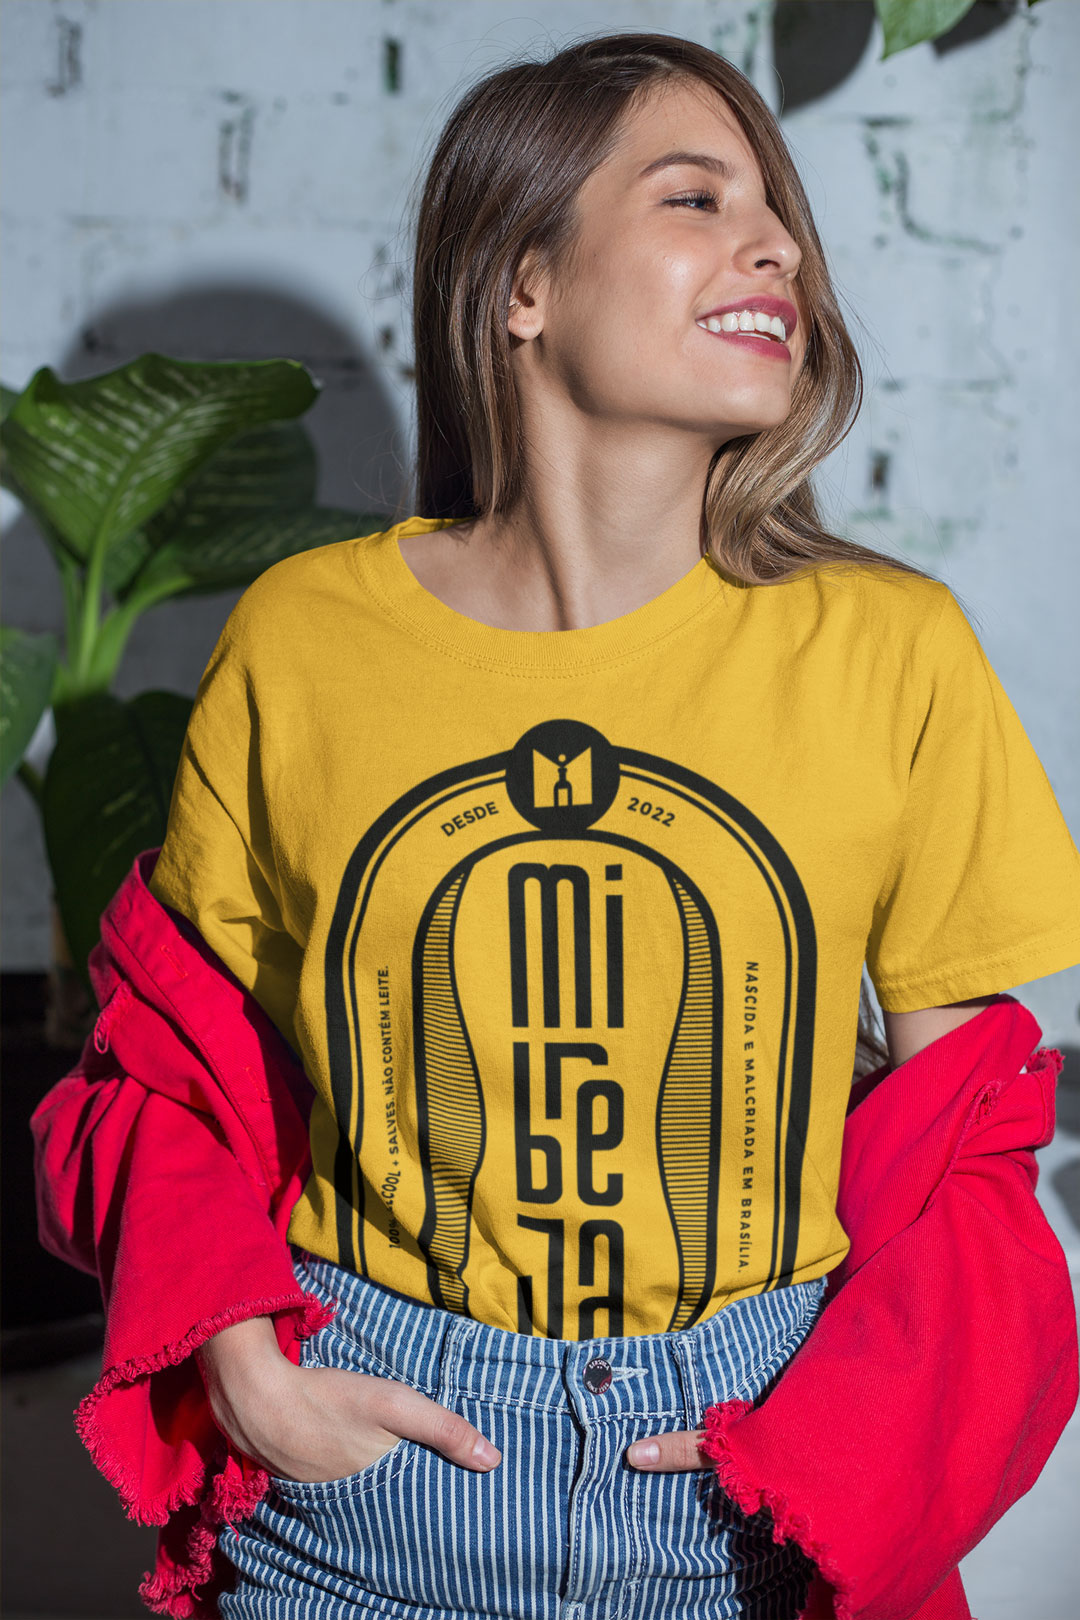 unisex-t-shirt-mockup-featuring-a-happy-girl-with-a-trendy-outfit-22962